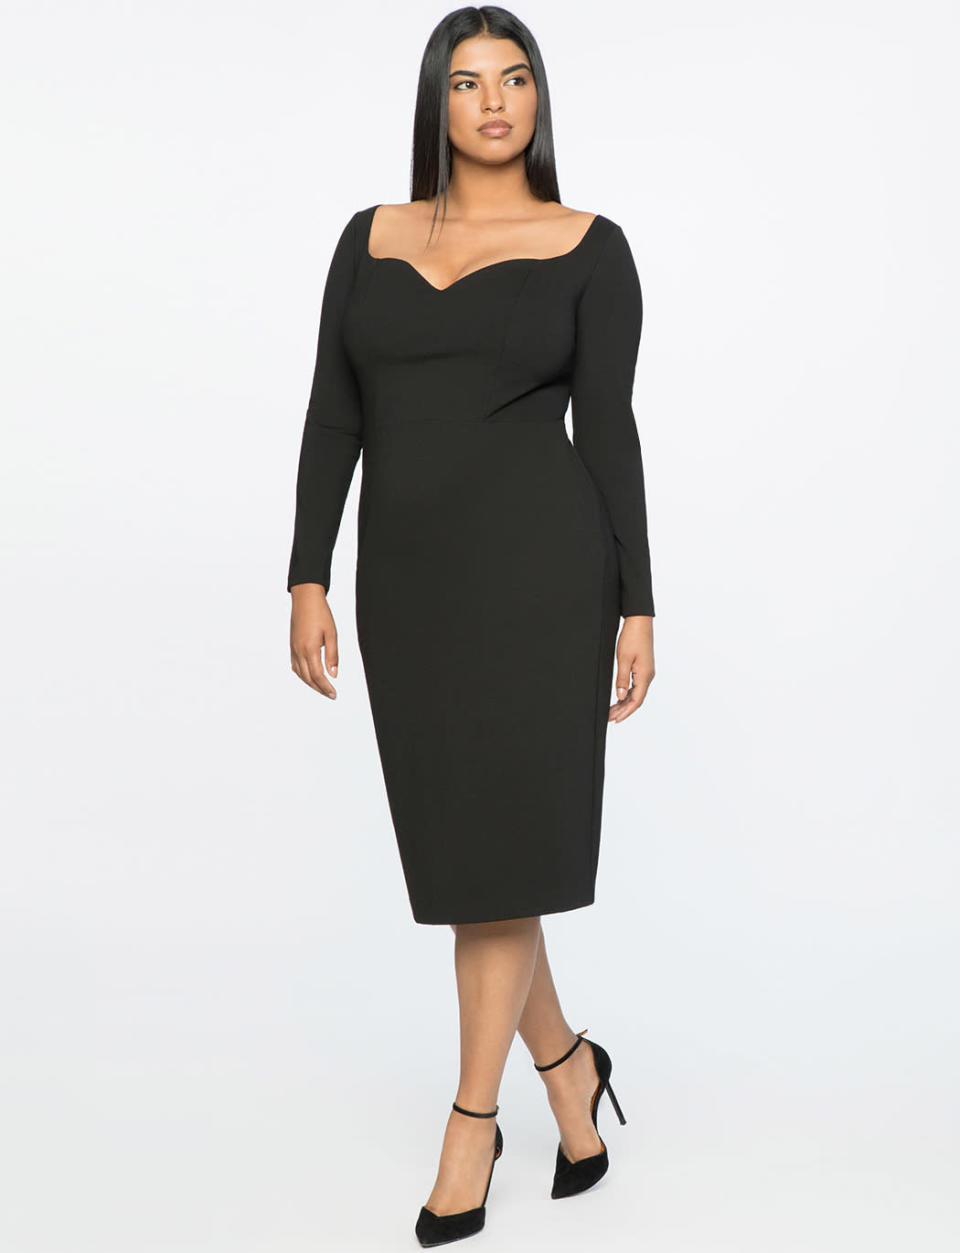 <p>This sweetheart neckline adds a feminine detail to an ordinary LBD. Chances are you’ll wear this dress over and over, well past the holidays. <br>Drape-front V-neck dress, $100, <a rel="nofollow noopener" href="https://fave.co/2zkGB4F" target="_blank" data-ylk="slk:eloquii.com" class="link rapid-noclick-resp">eloquii.com</a> </p>